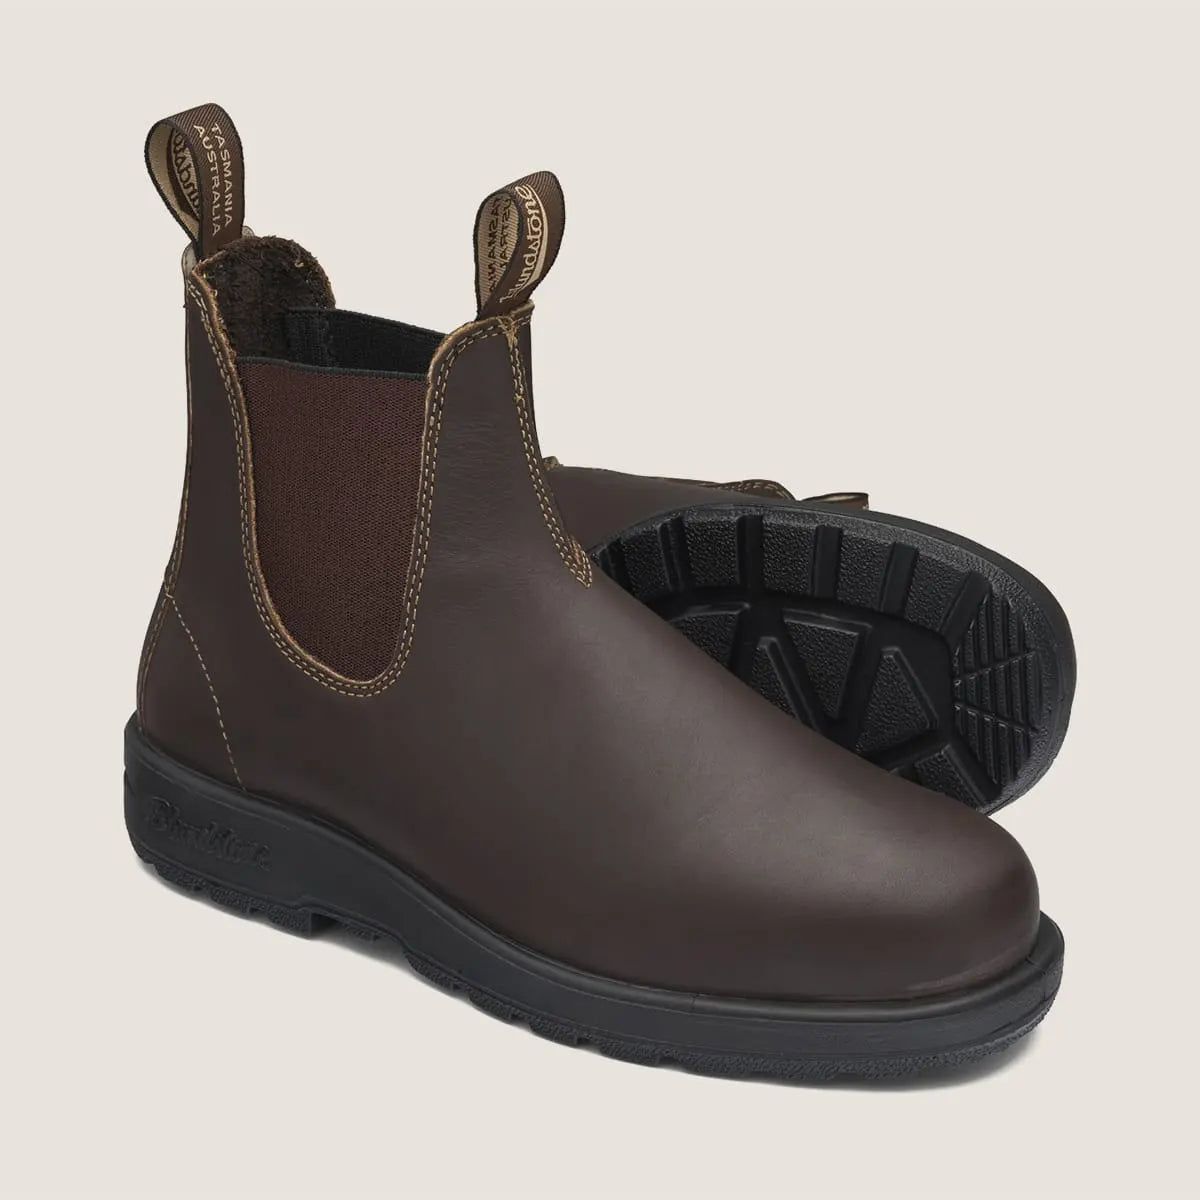 Blundstone 200 Elastic Side Work Boots in Chestnut